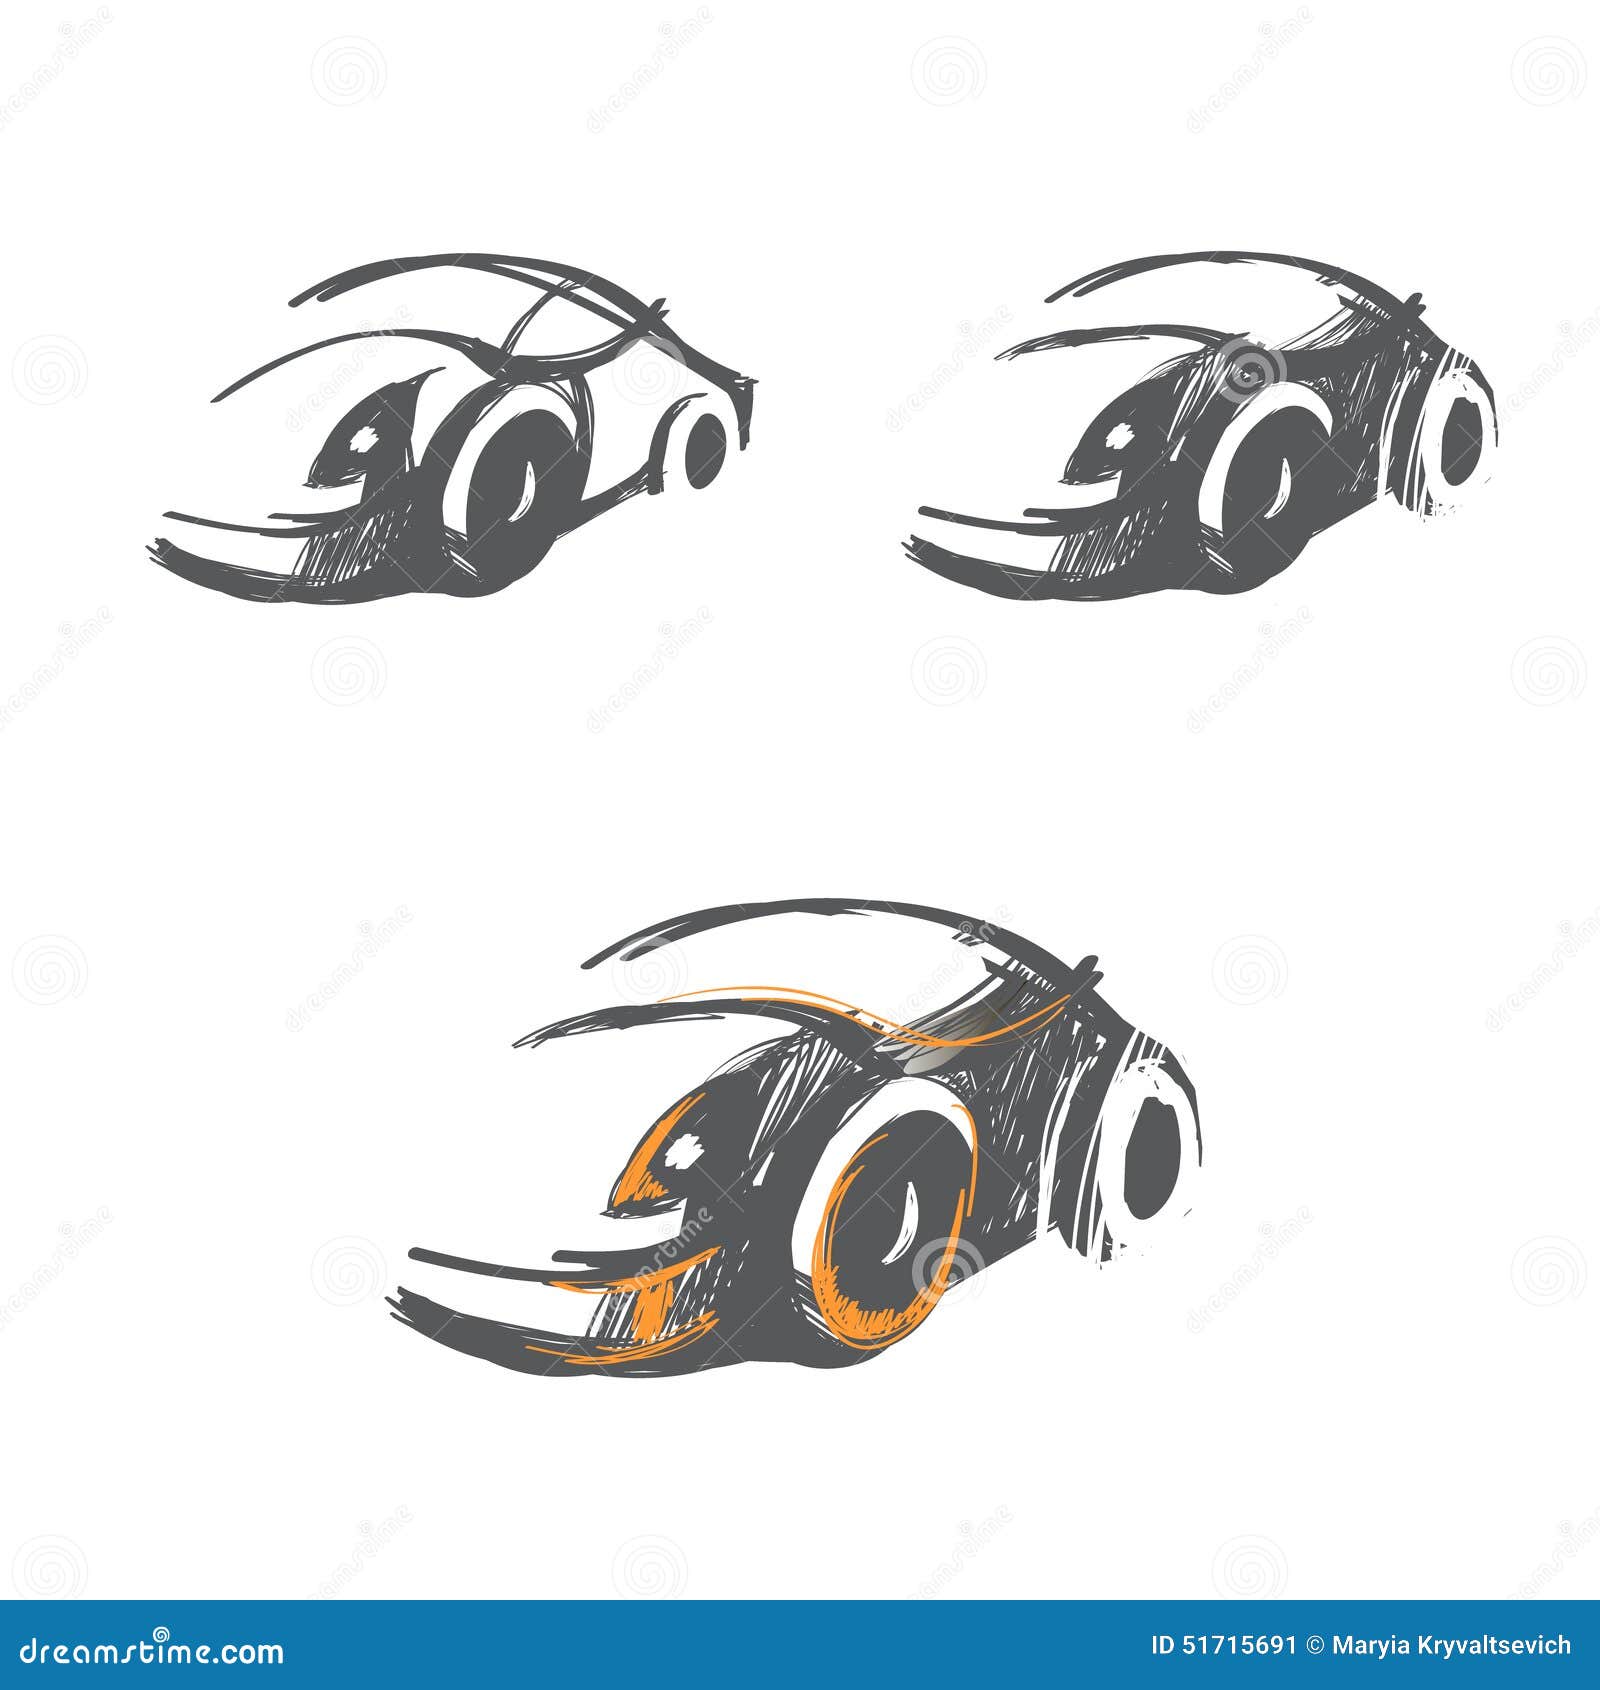 I'm A Real Car Designer And I'll Draw Your Ridiculous Ideas - The Autopian